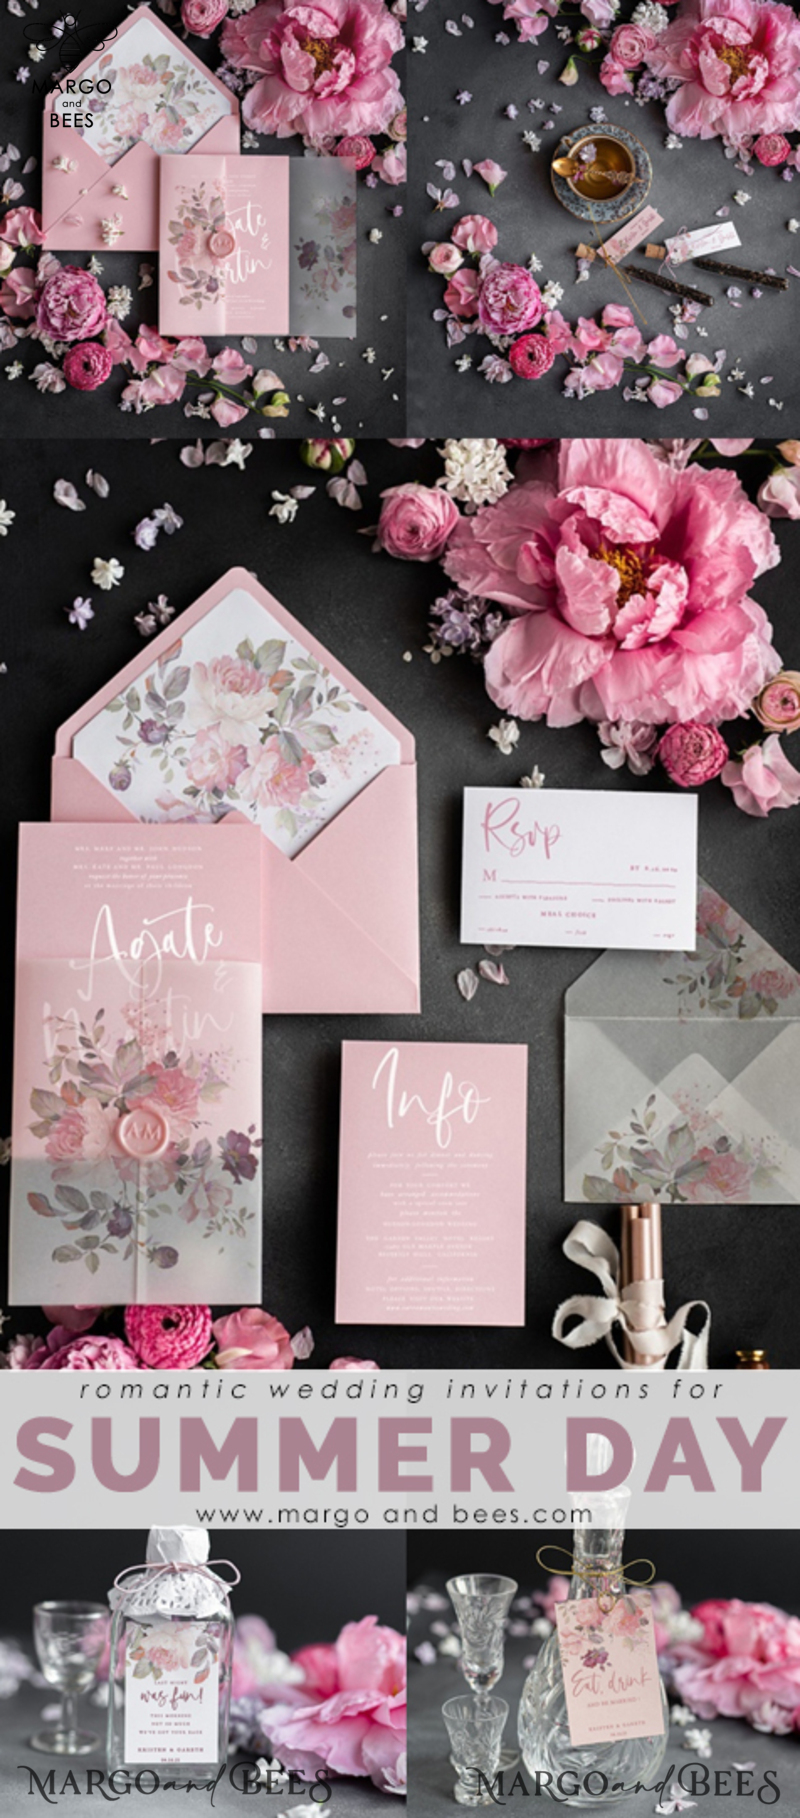 Glamour Pink Wedding Invitations, Romantic Floral Wedding Invites, Luxury Wedding Cards With Vellum Wrapping, Delicate And Handmade Wedding Stationery-6